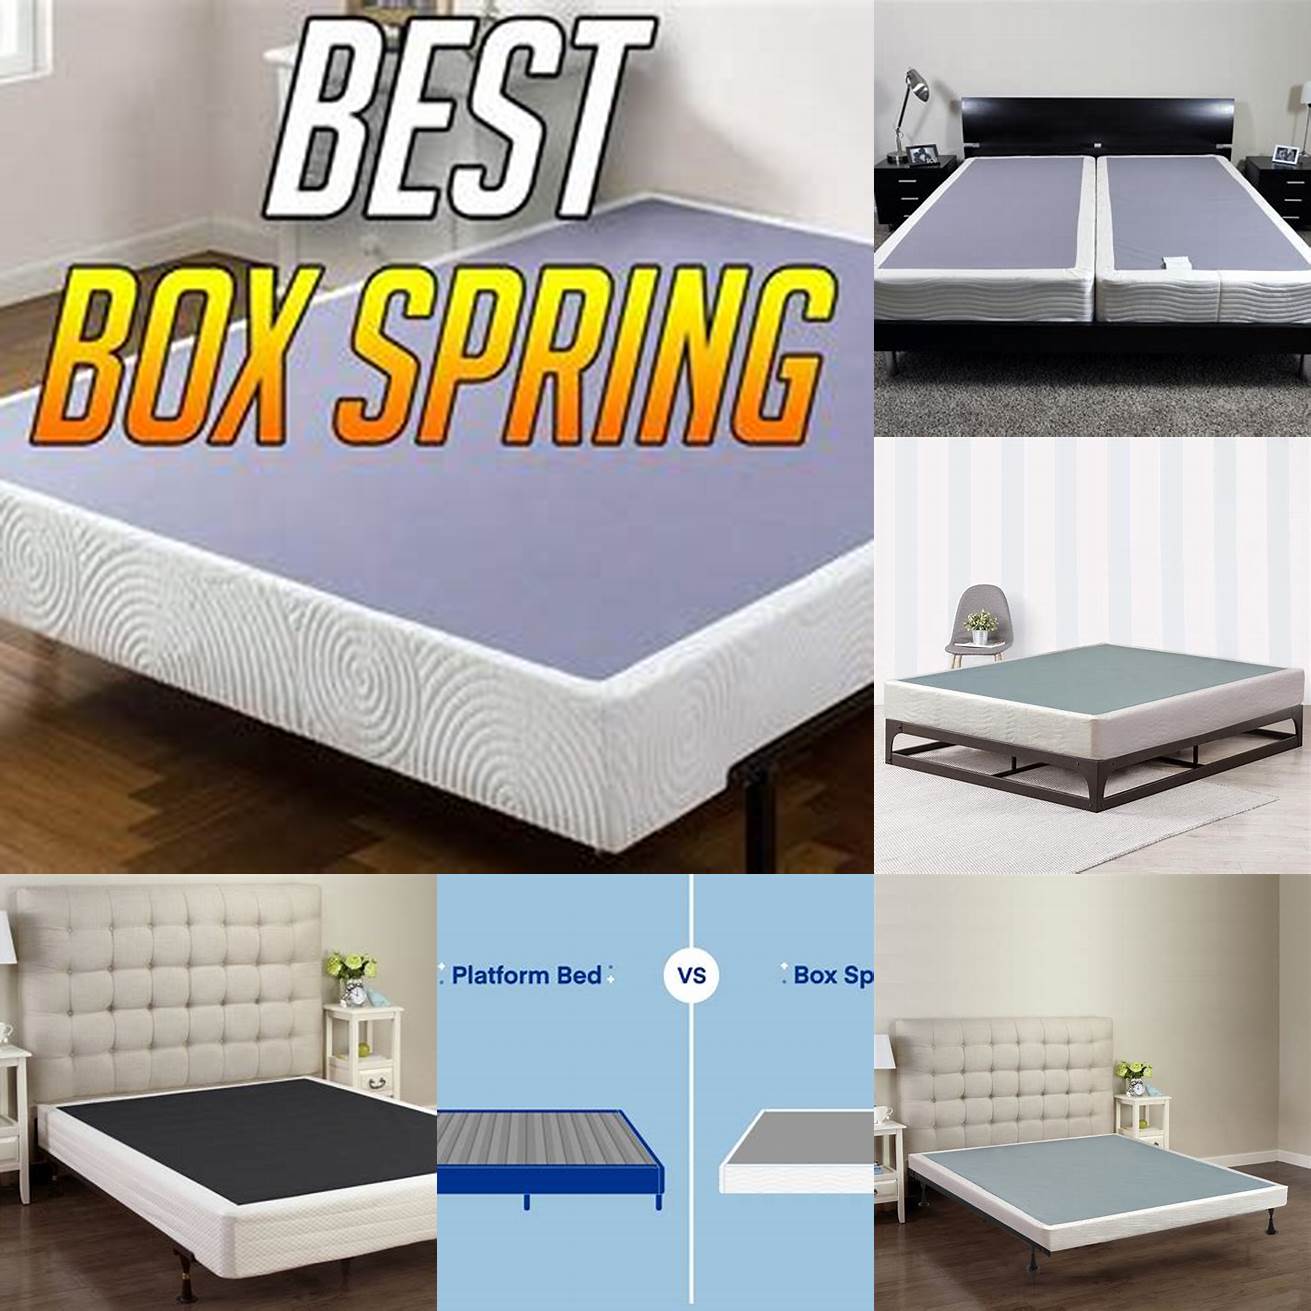 May require a box spring which adds to the cost